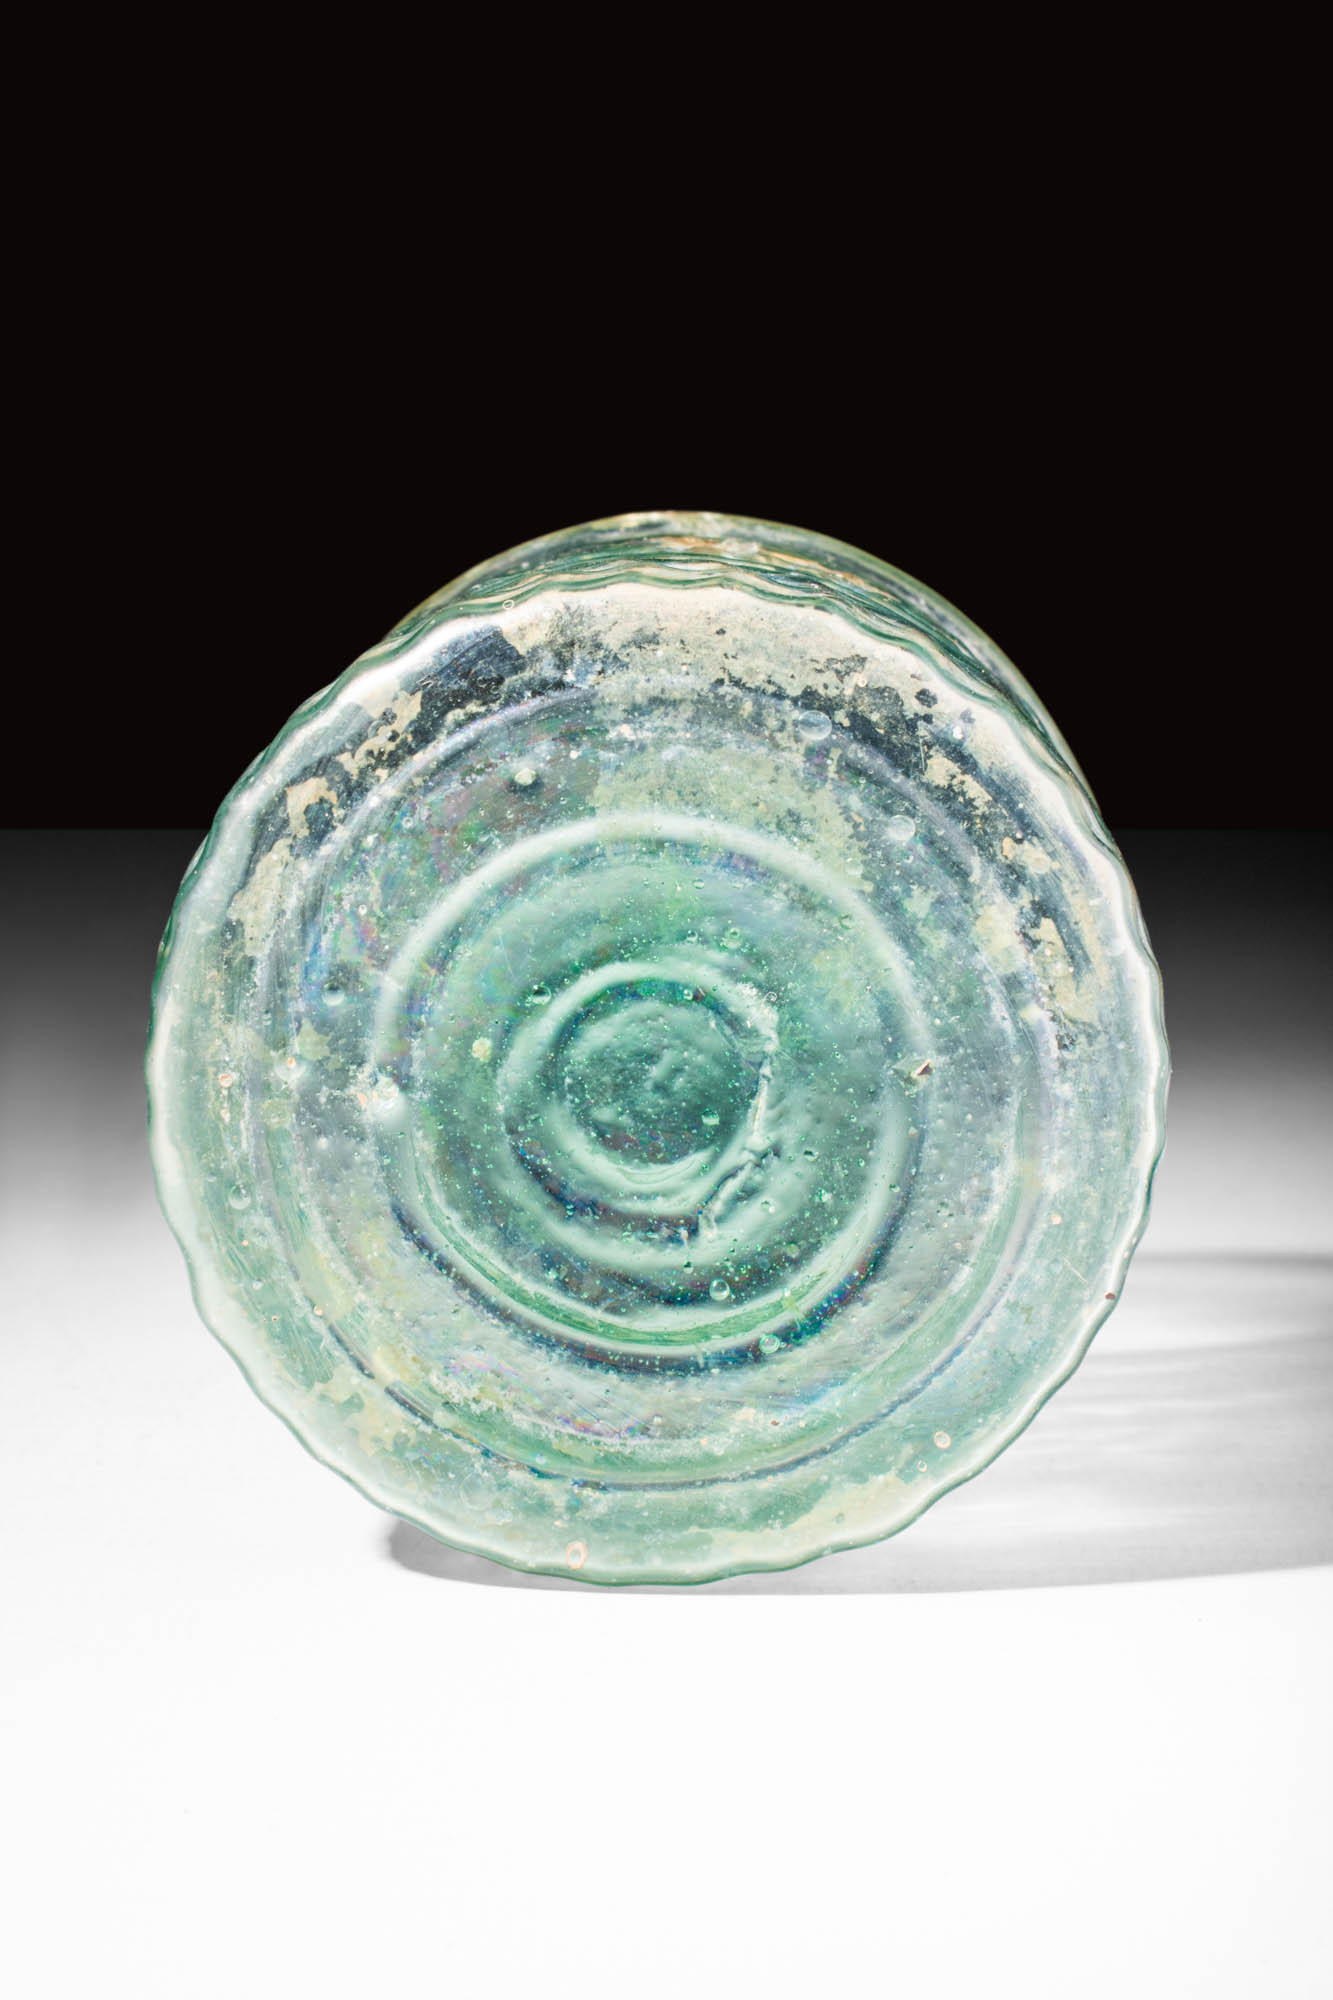 BYZANTINE GLASS CUP DECORATED WITH INSCRIPTION - Image 4 of 5